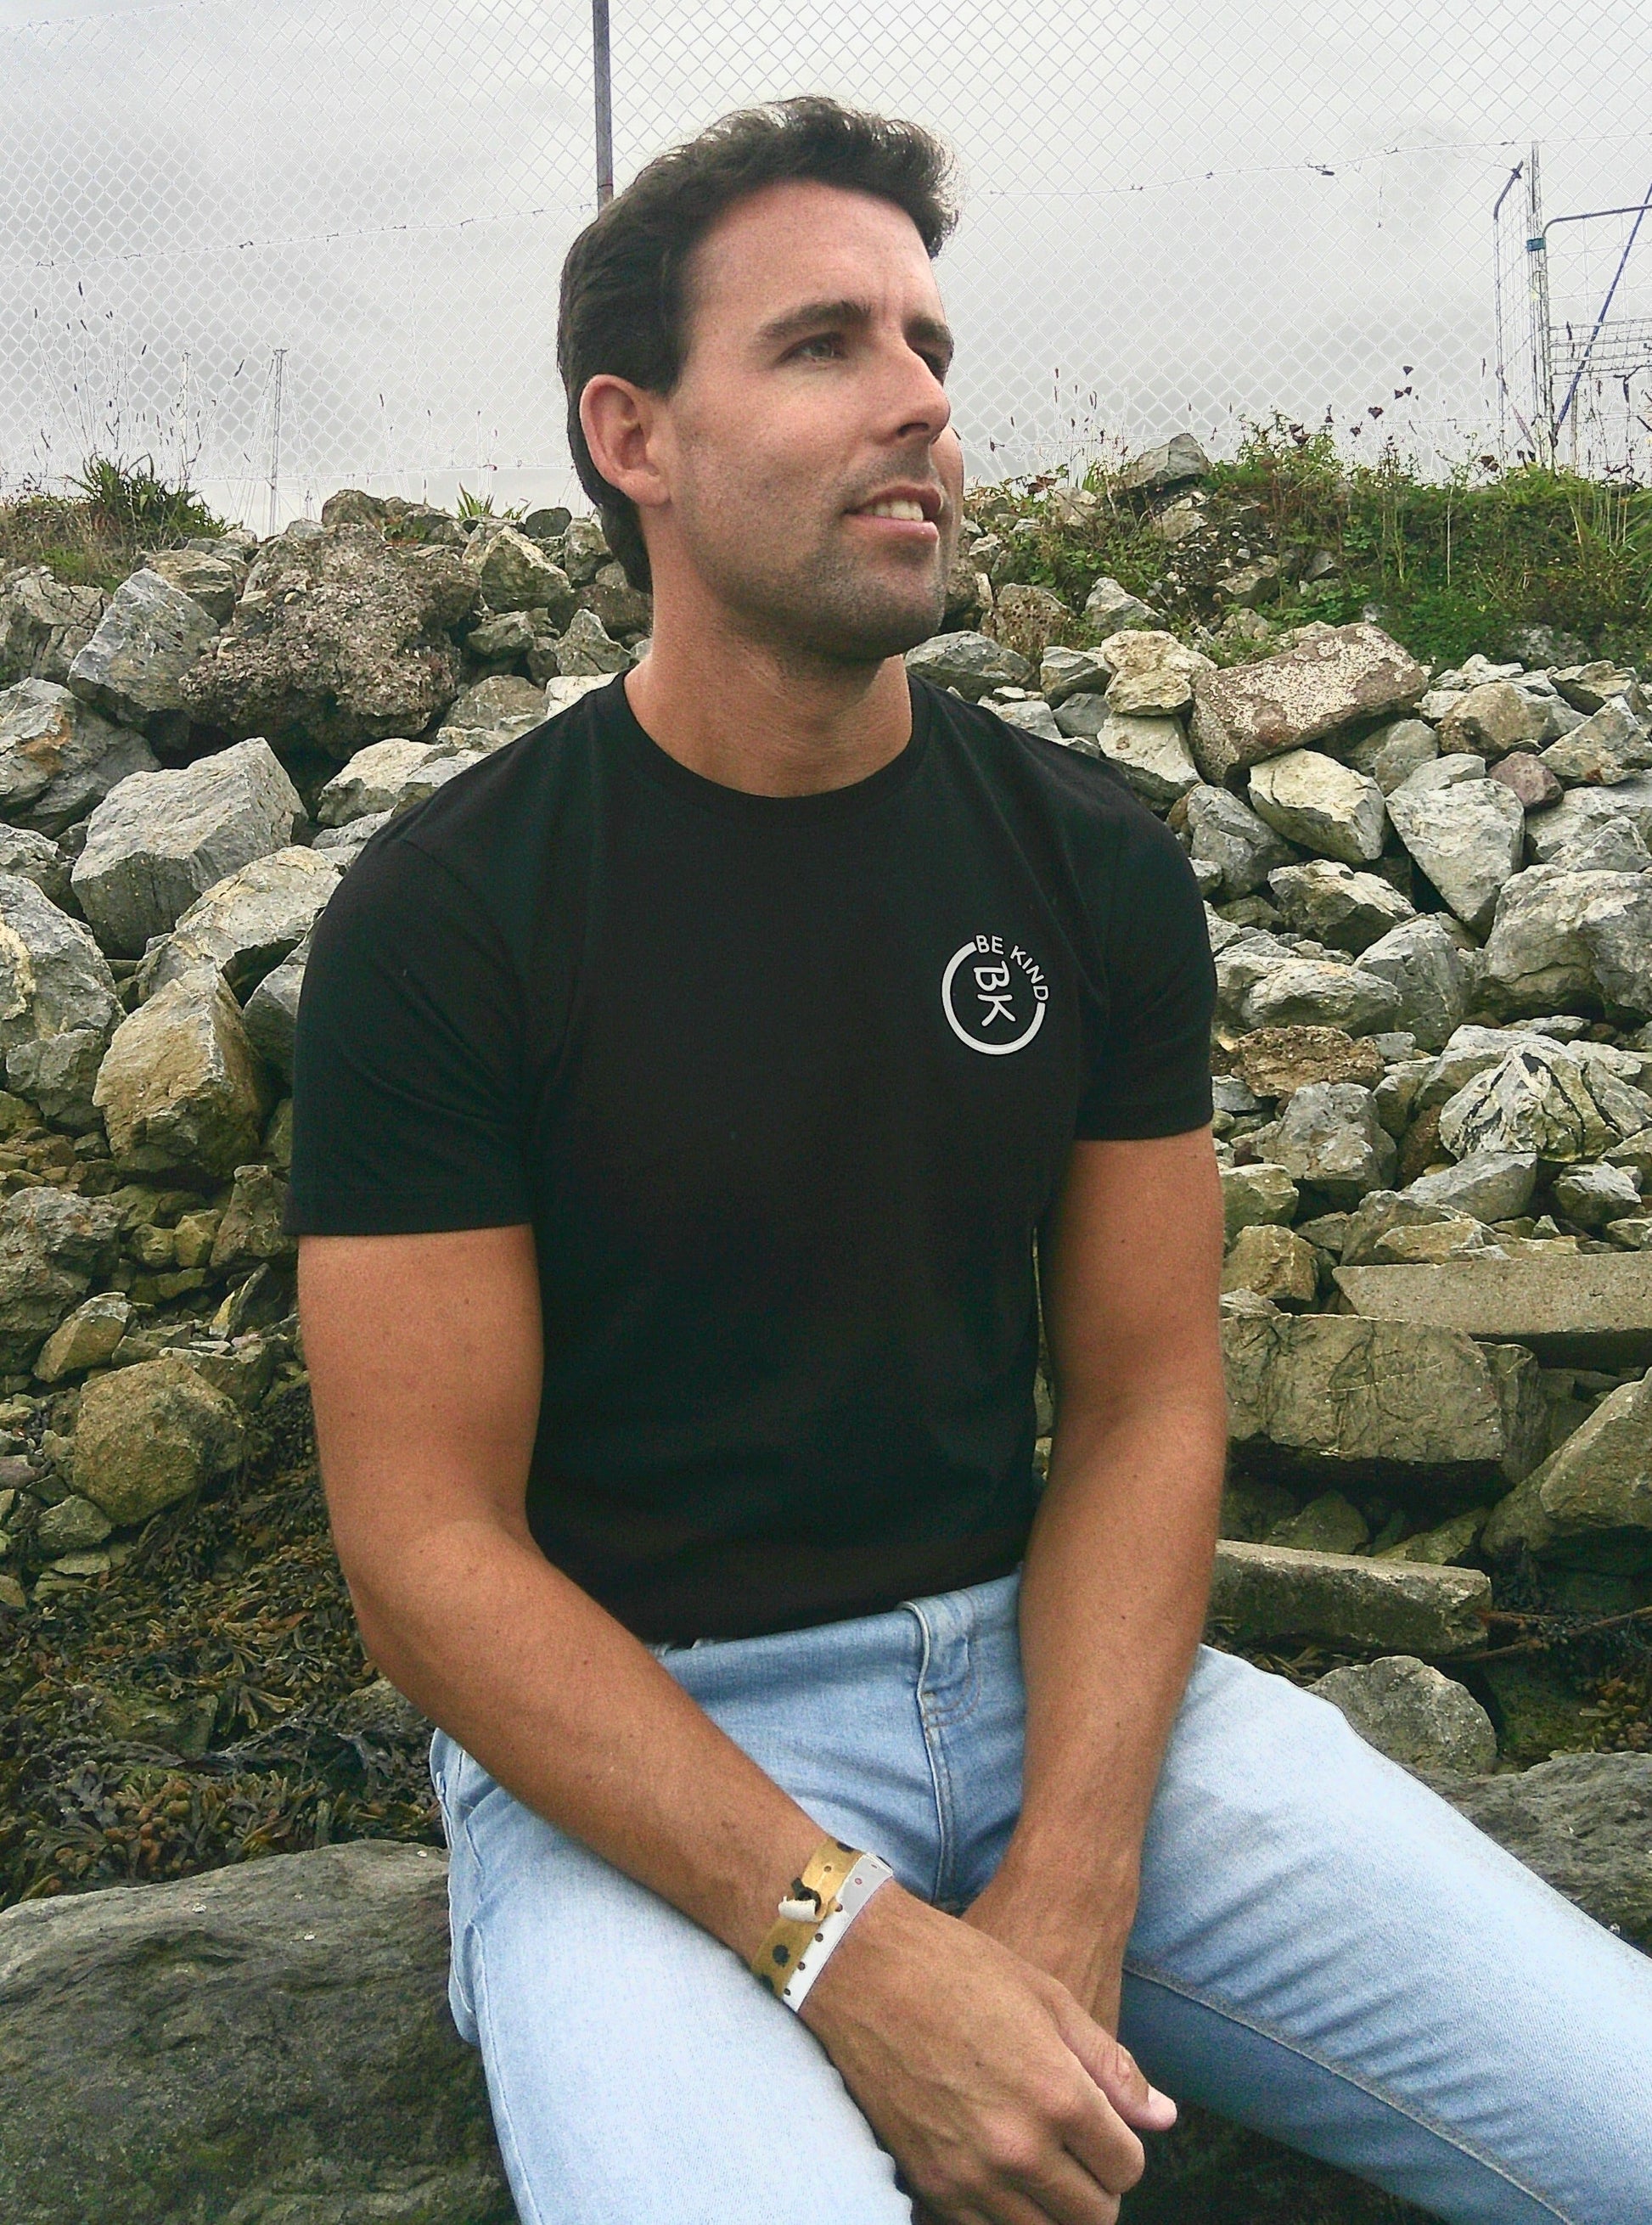 A man sits, he's wearing a Black Organic Cotton Connector T-Shirt from the Be Kind Apparel Connector Range